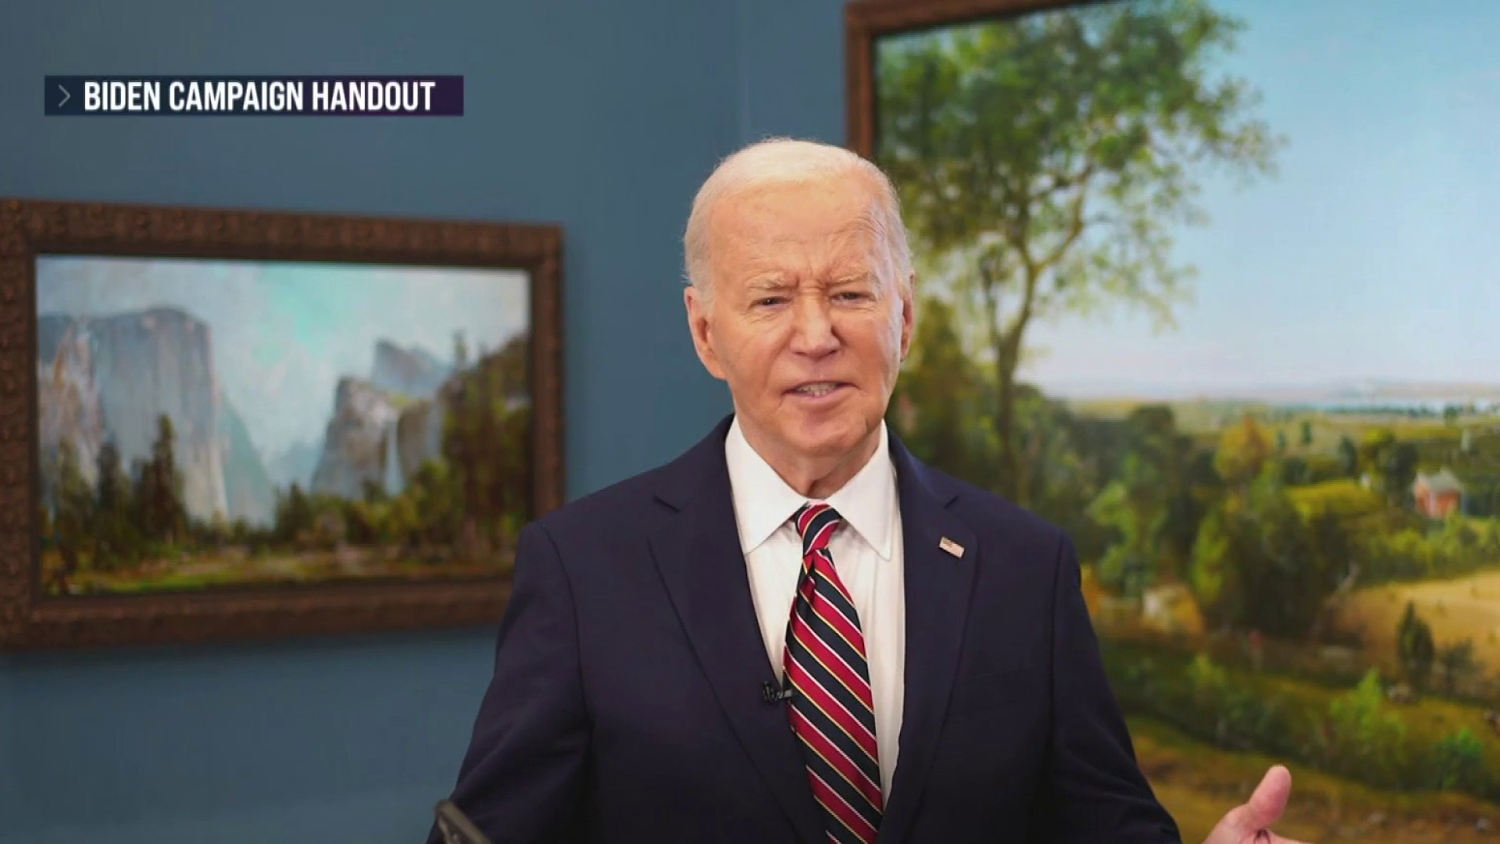 Biden lashes out at Trump for sharing video with language associated with Nazis